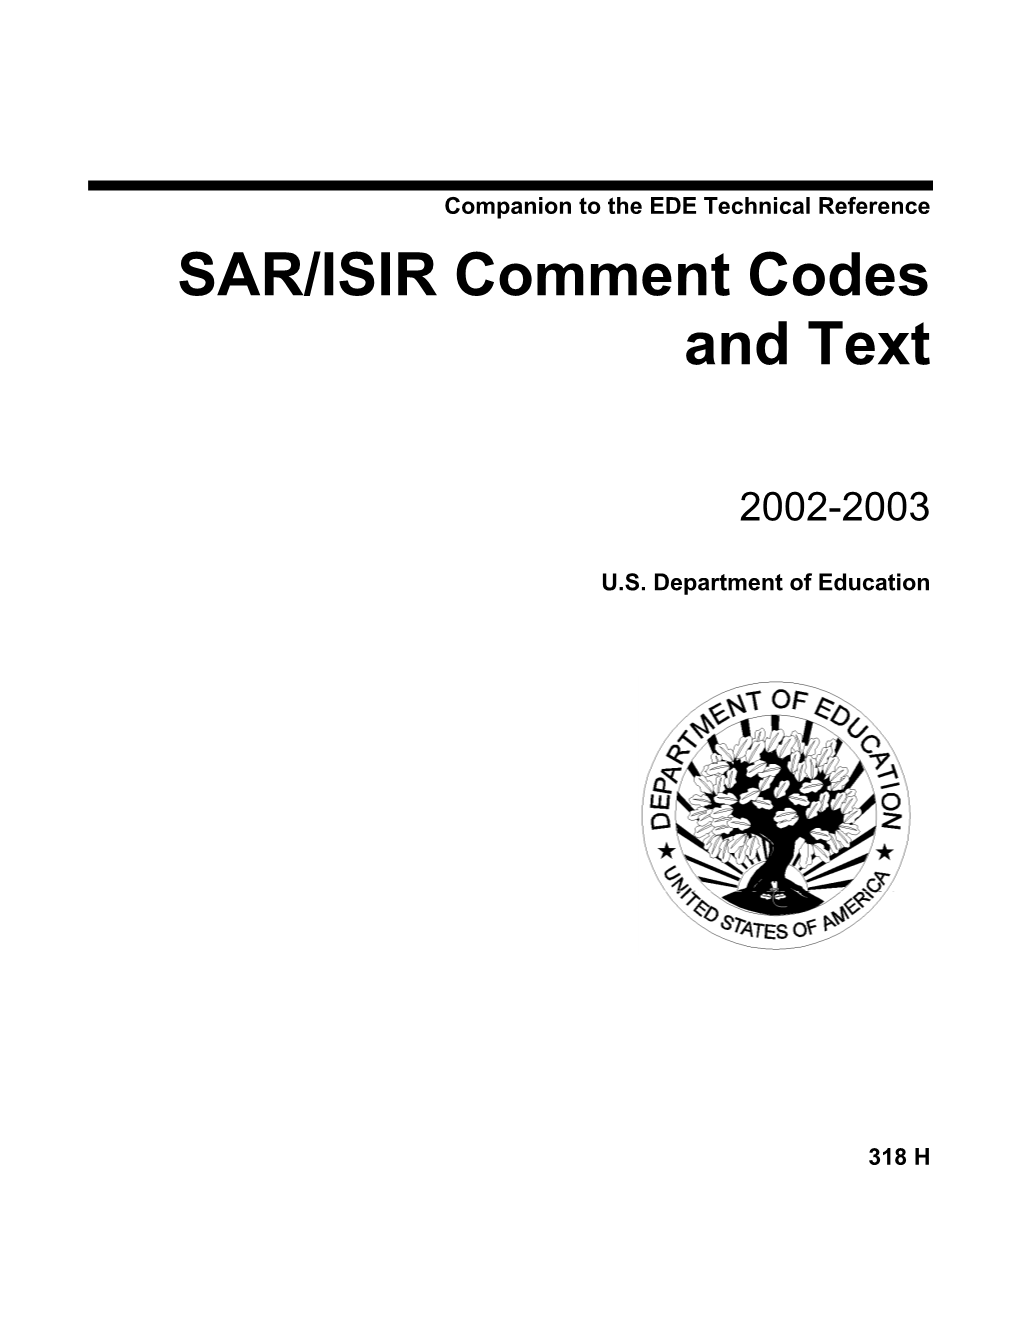 SAR/ISIR Comment Codes and Text, Feb 2002